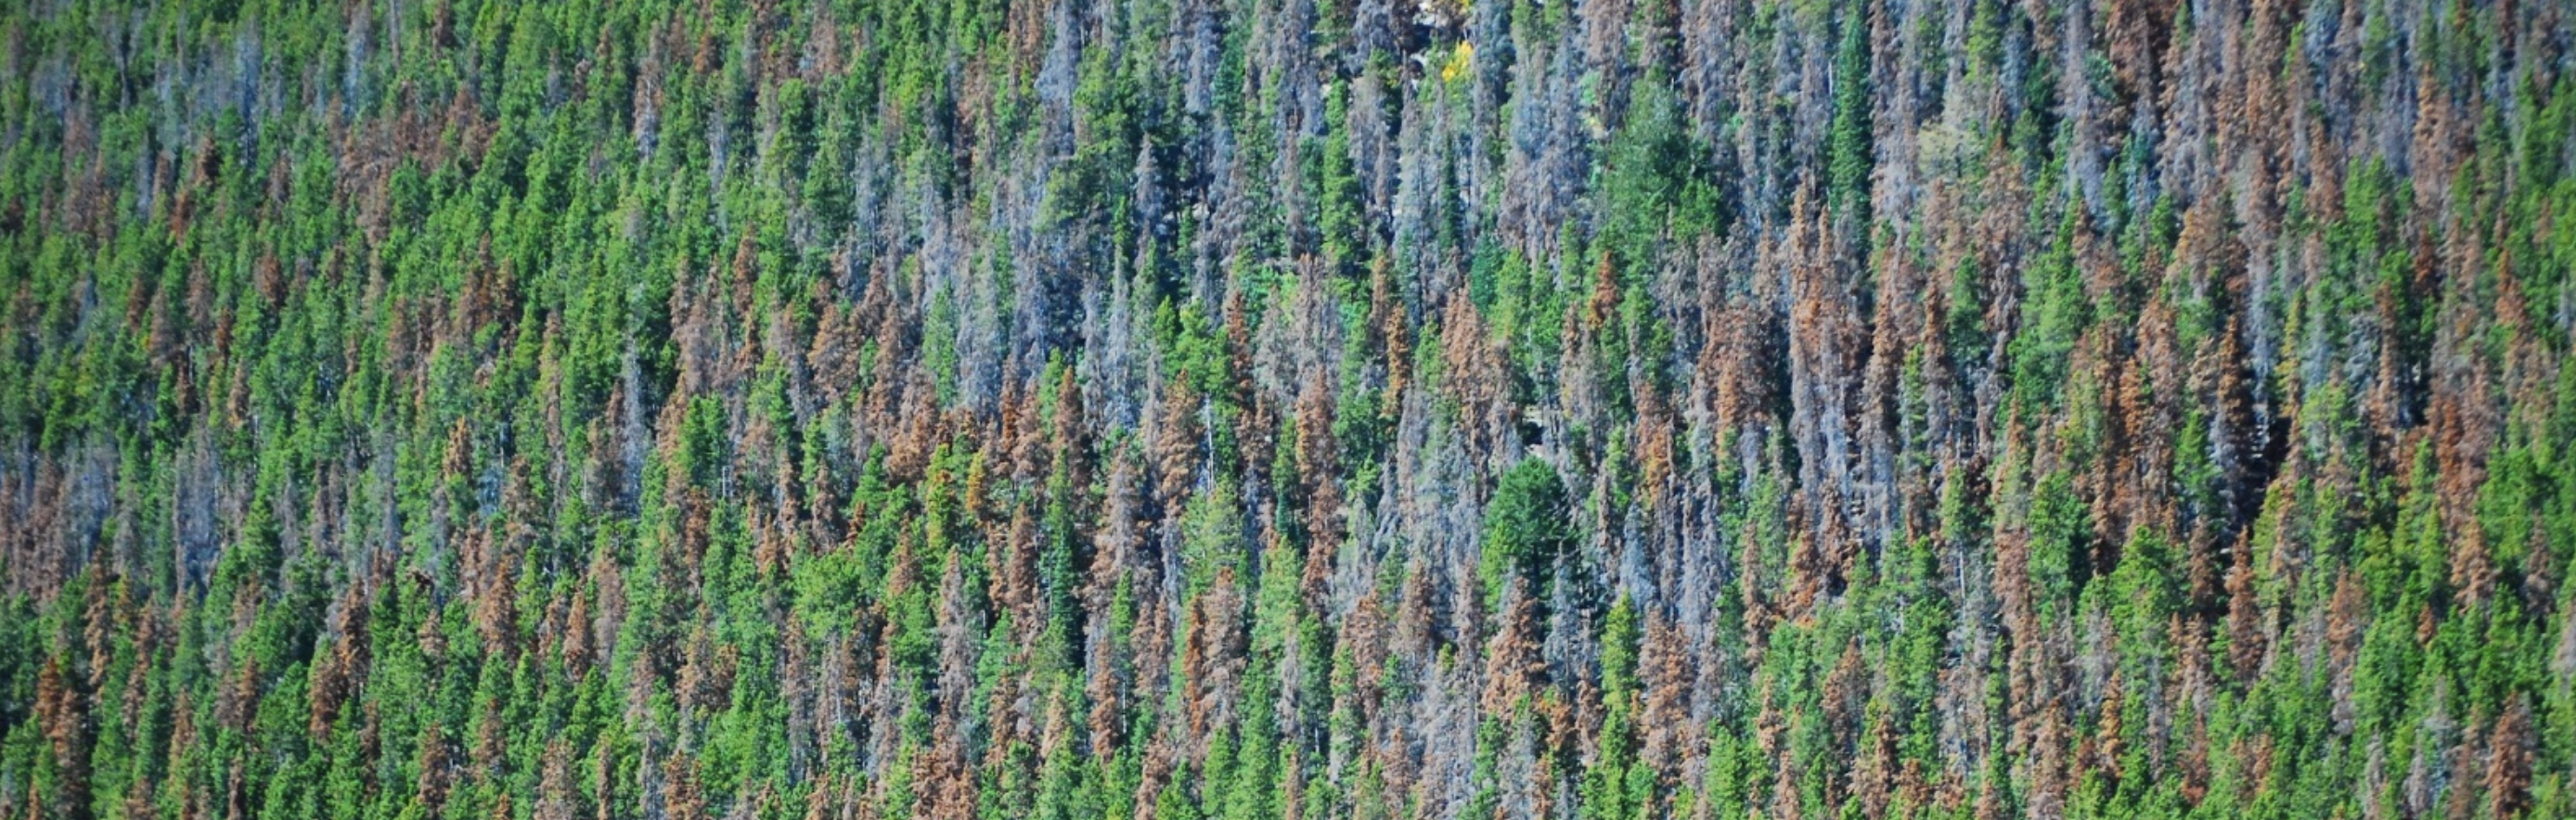 aerial view of a pine forest with sporadic dead trees from mountain pine beetle